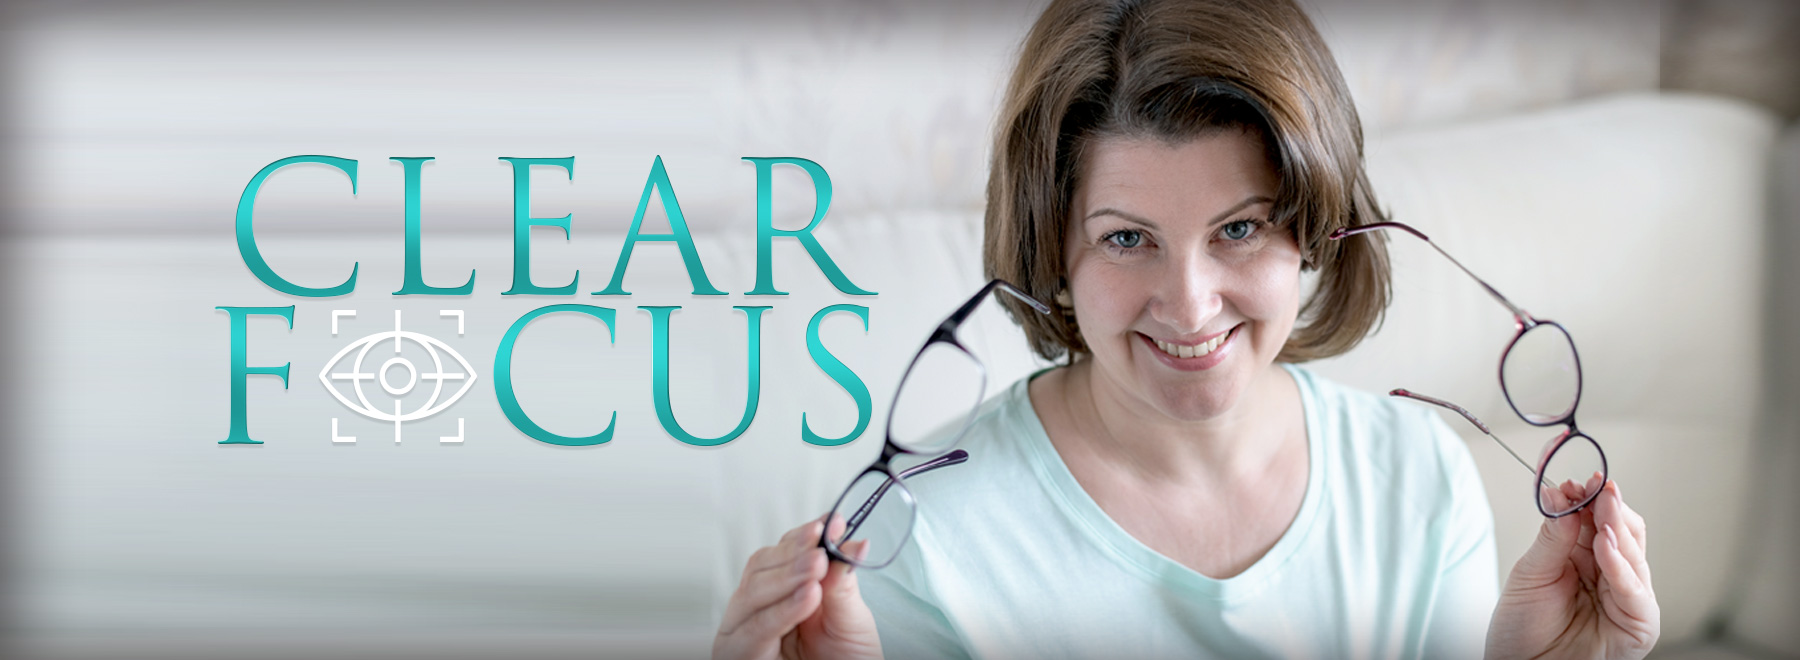 Clear Focus woman with reading glasses in hand